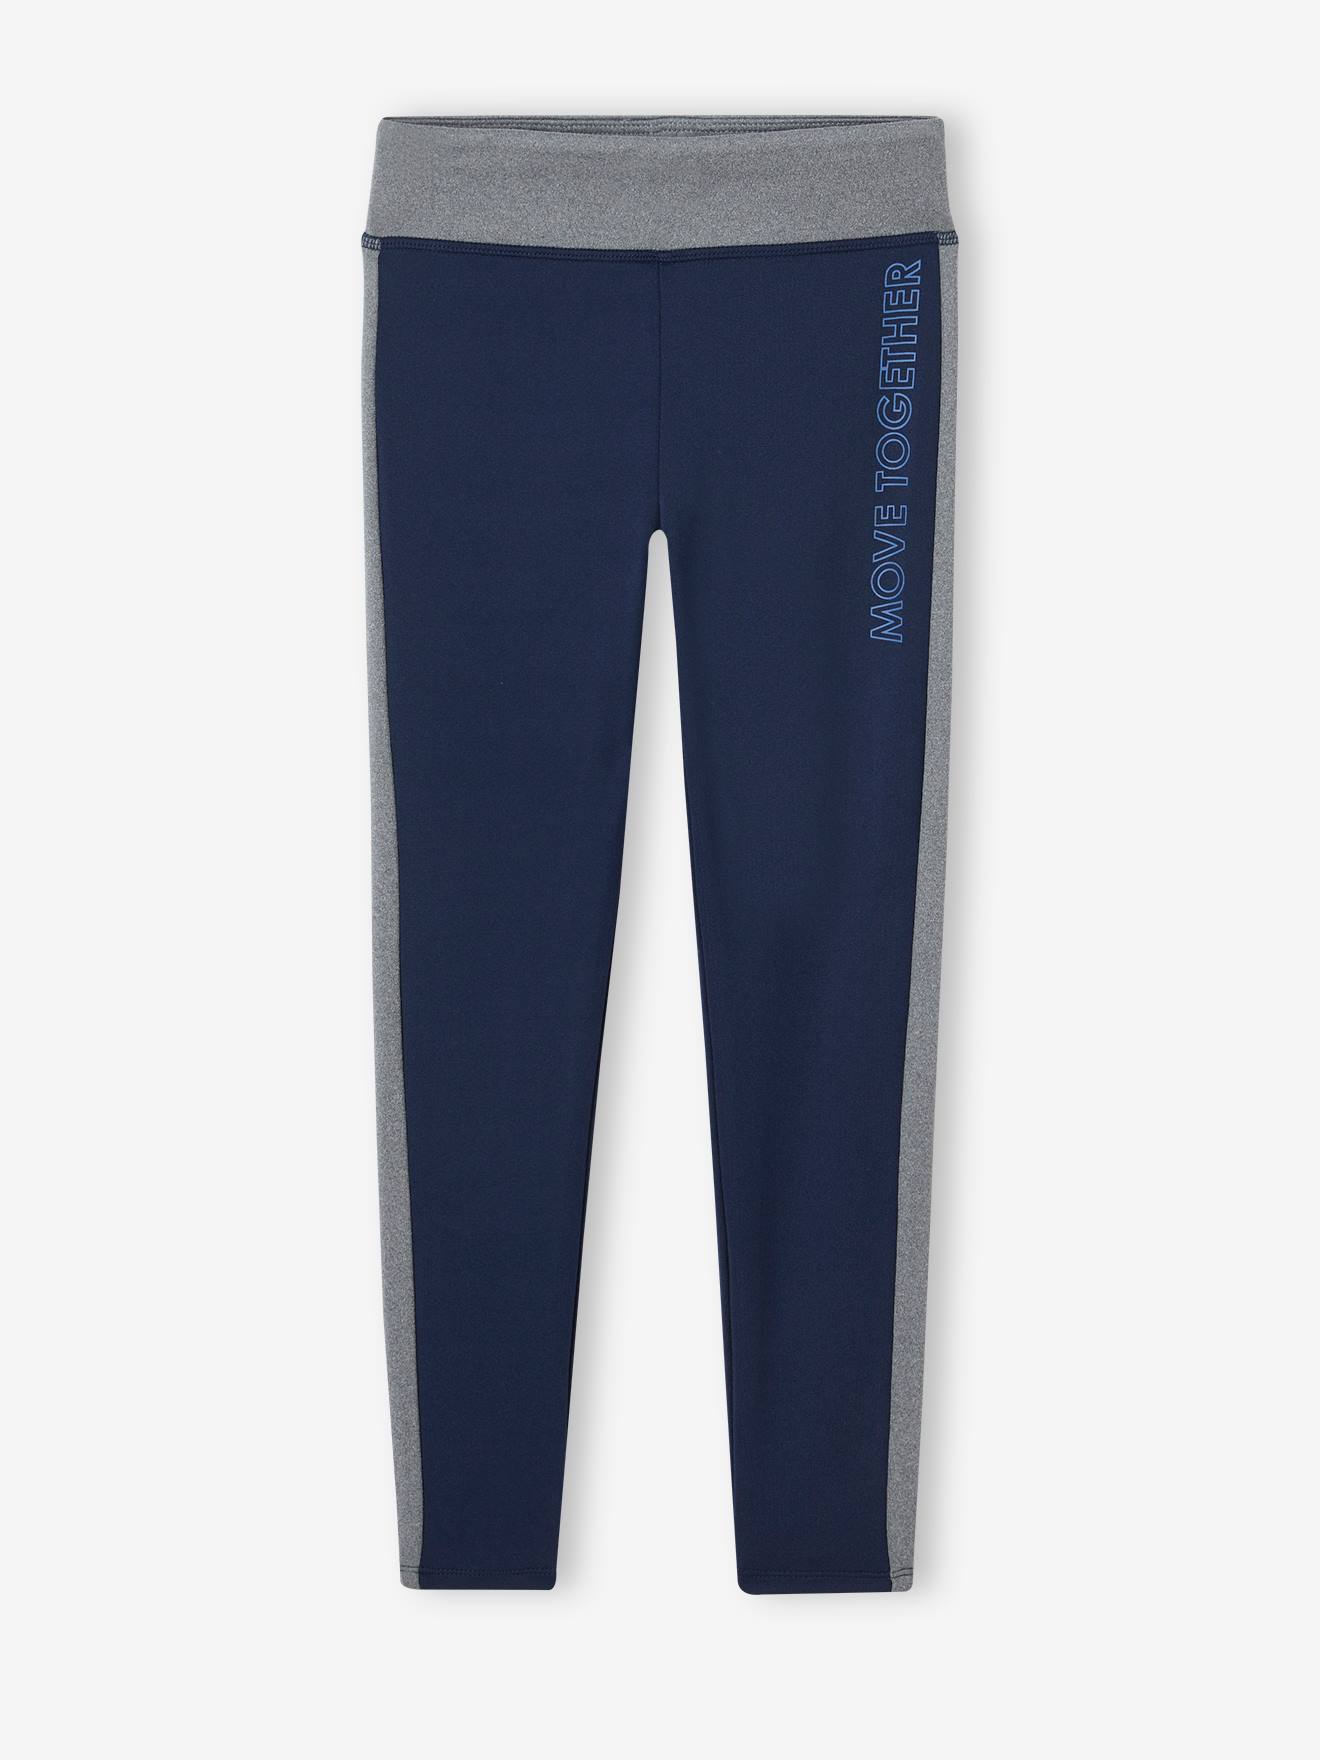 Sports Leggings with Stripe Down the Sides, for Girls navy blue